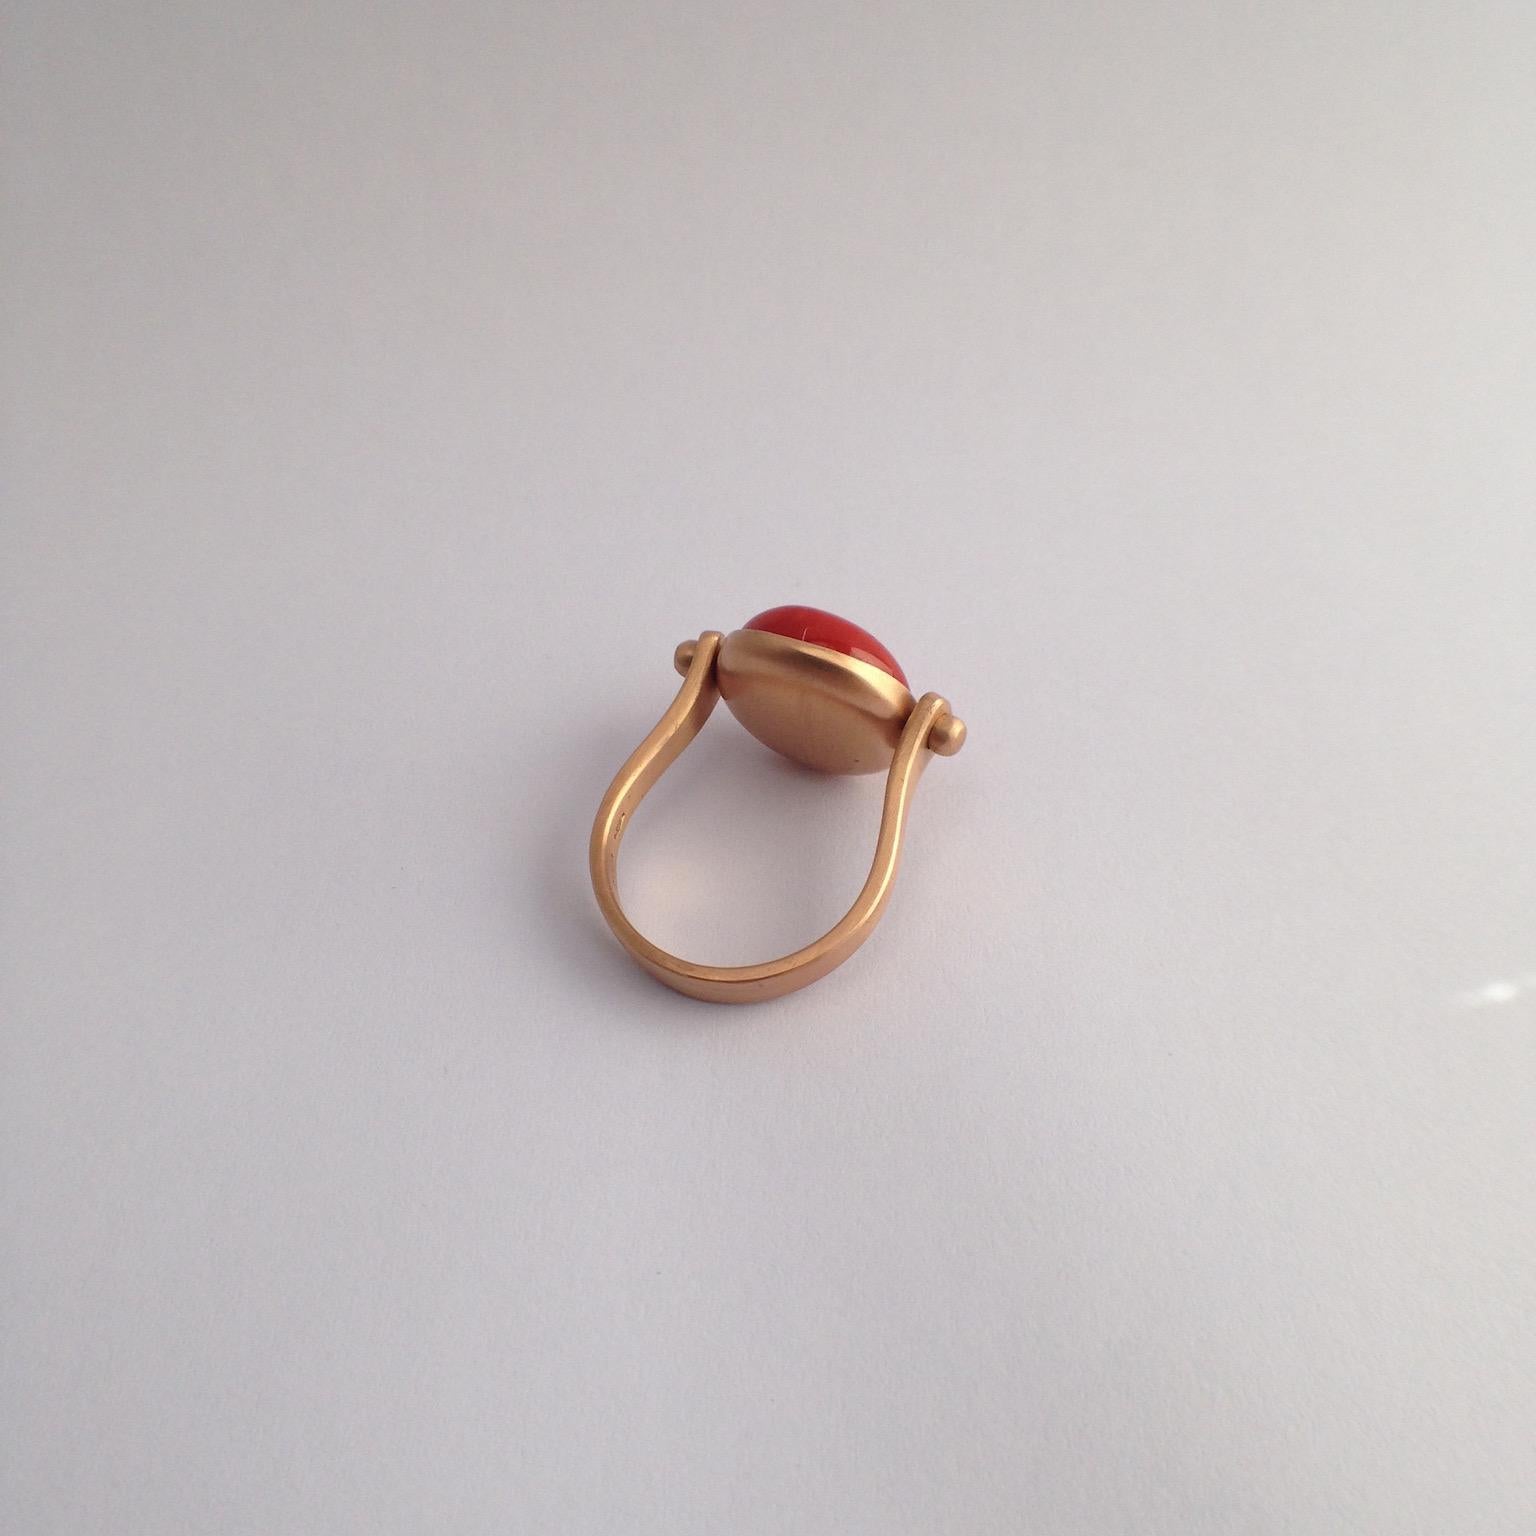 Gemstone Red Coral Roman Style Red 18 Kt Gold Reversible Italian Ring
This ring is inspired by my love of ancient Roman jewelry. They used to wear  a ring where its head would be round. 
There's a red round coral as a button above and if you round